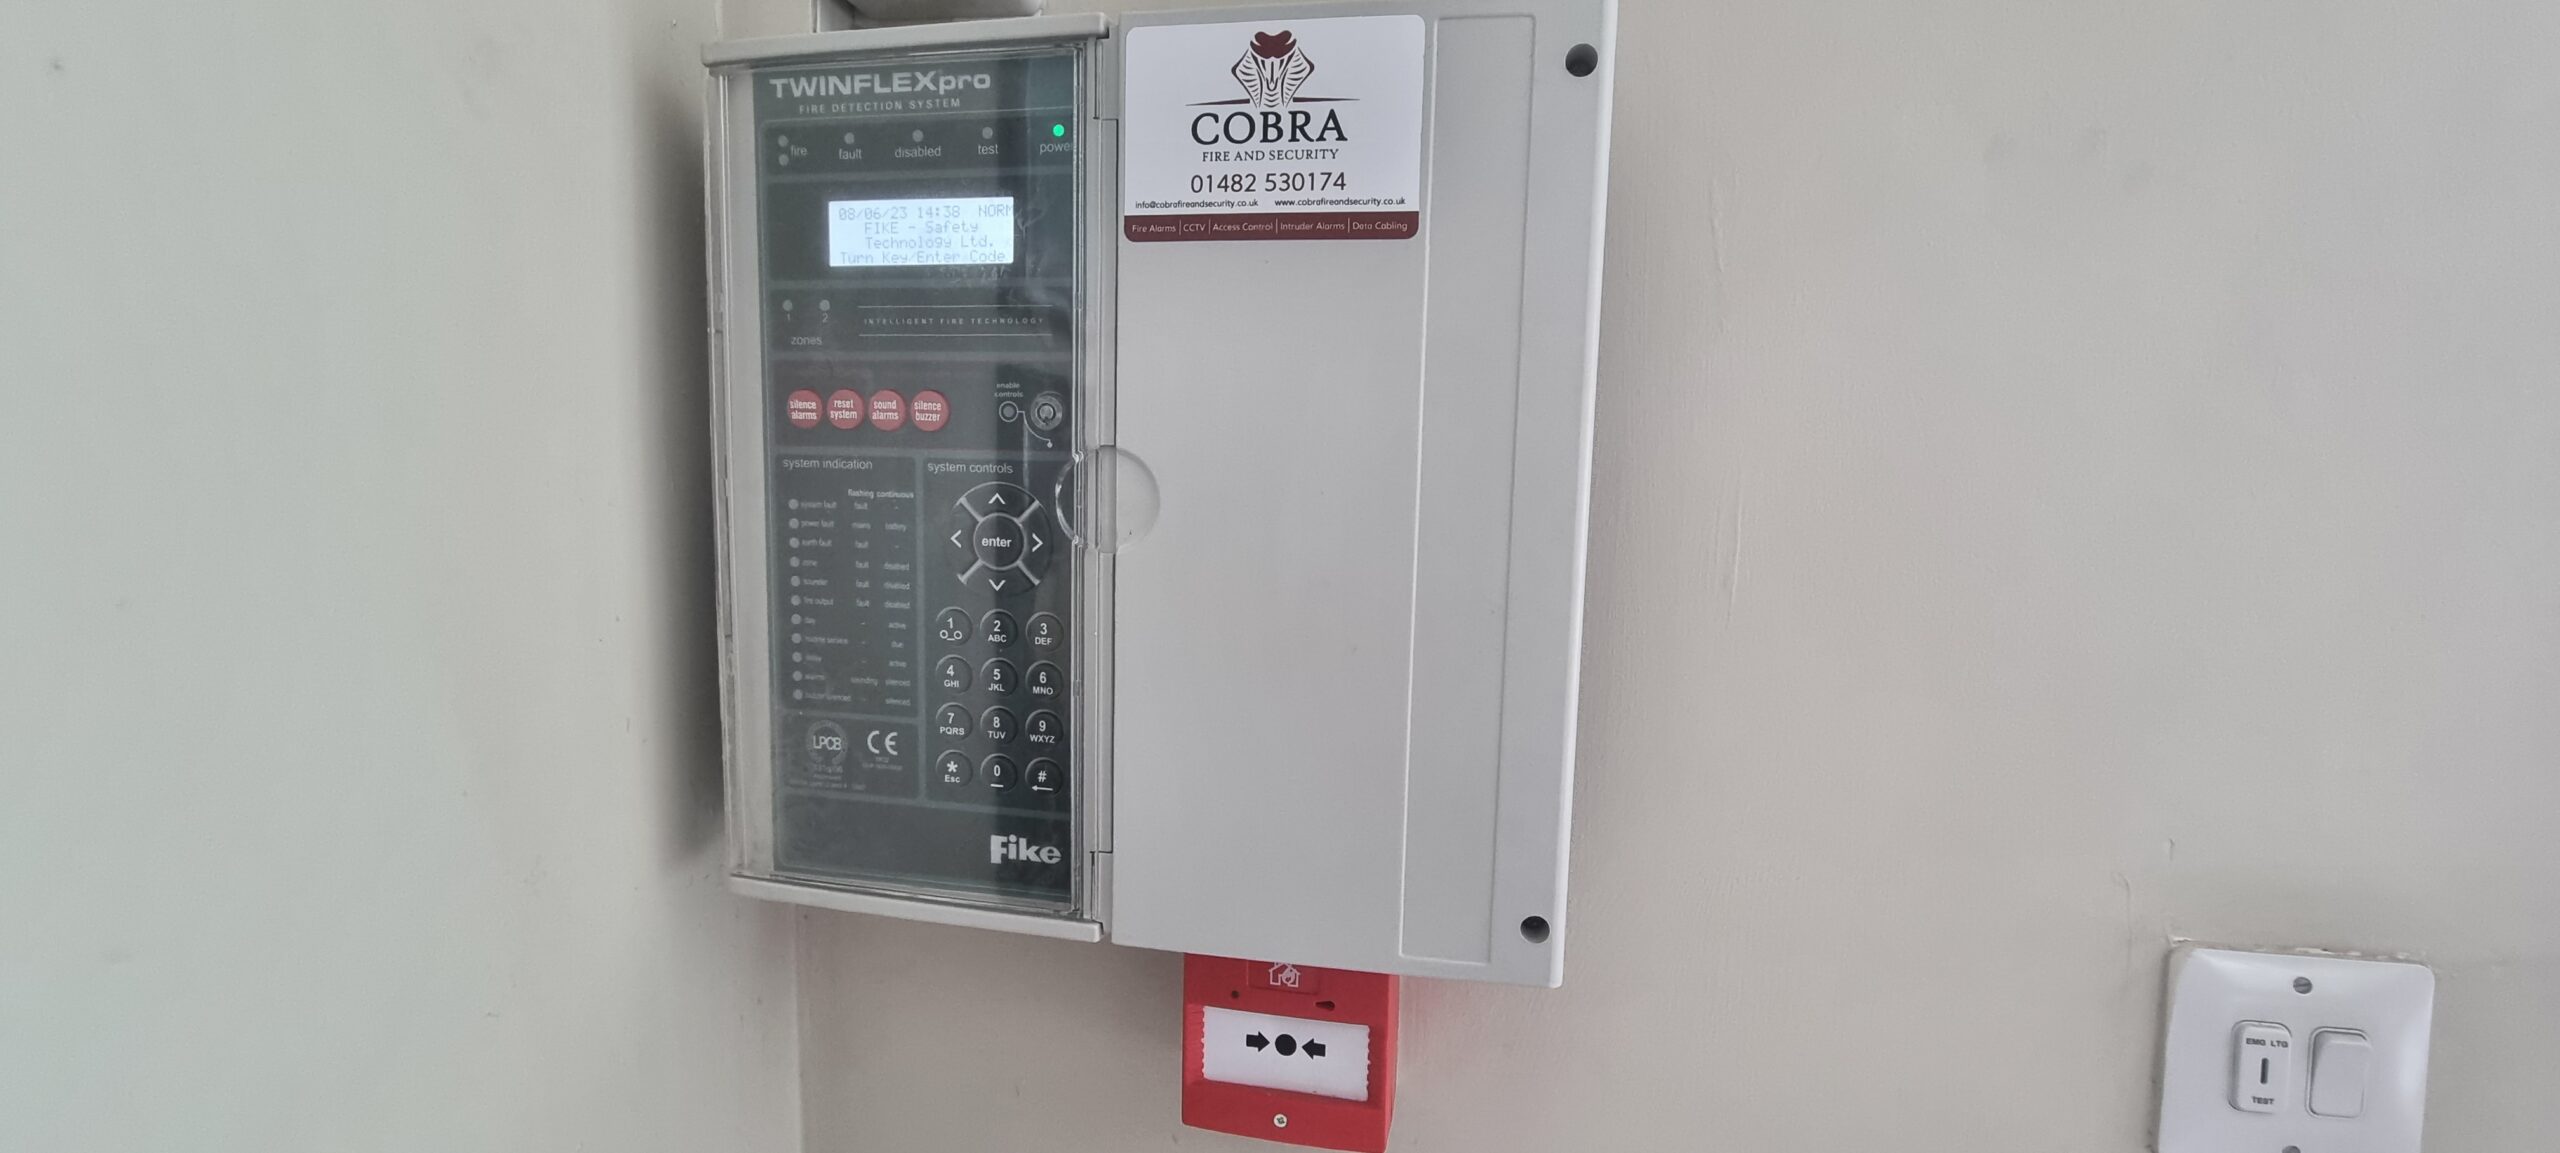 A fire alarm system in a workplace